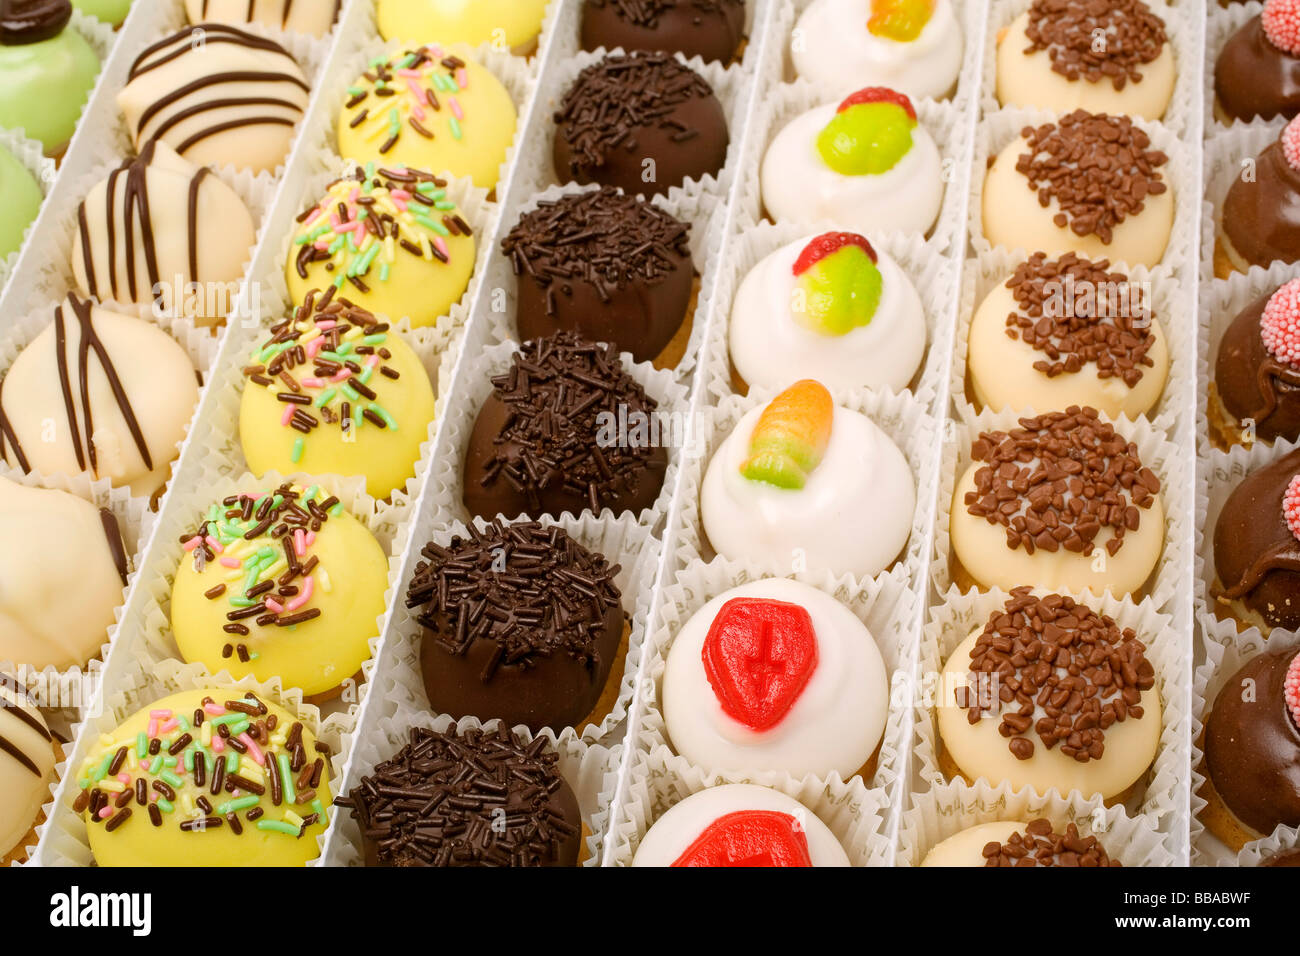 Dulces y Pasteles Sweets and Cakes Stock Photo